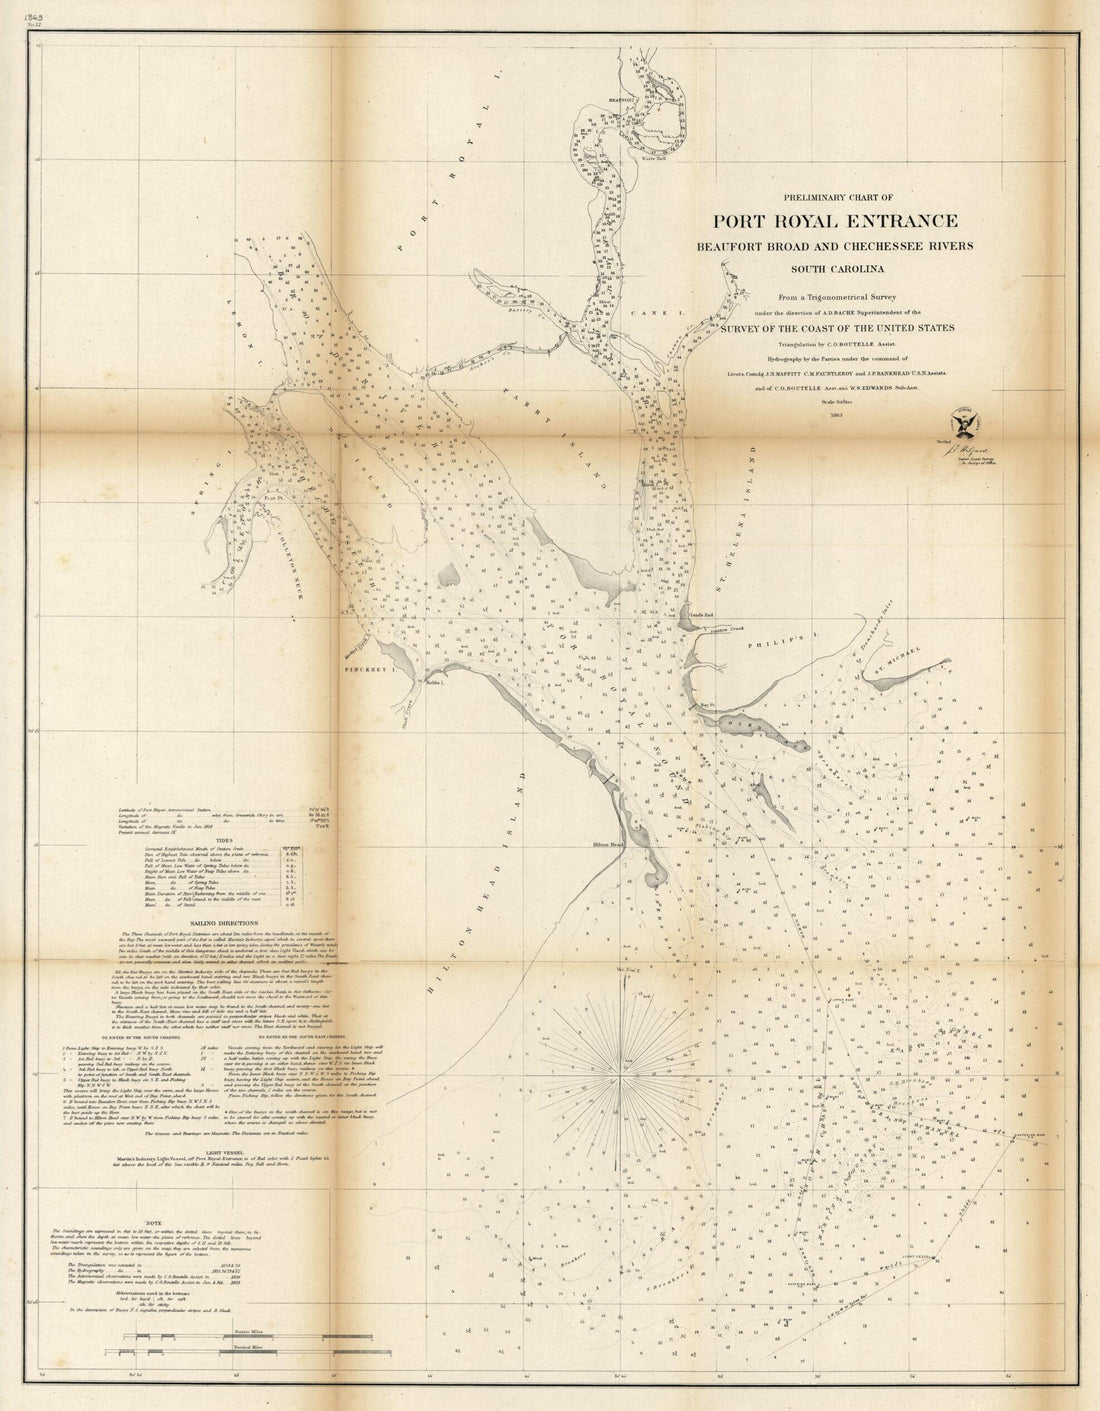 This old map of Preliminary Chart of Port Royal Entrance, Beaufort, Broad and Chechessee Rivers, South Carolina from 1863 was created by  United States Coast Survey in 1863